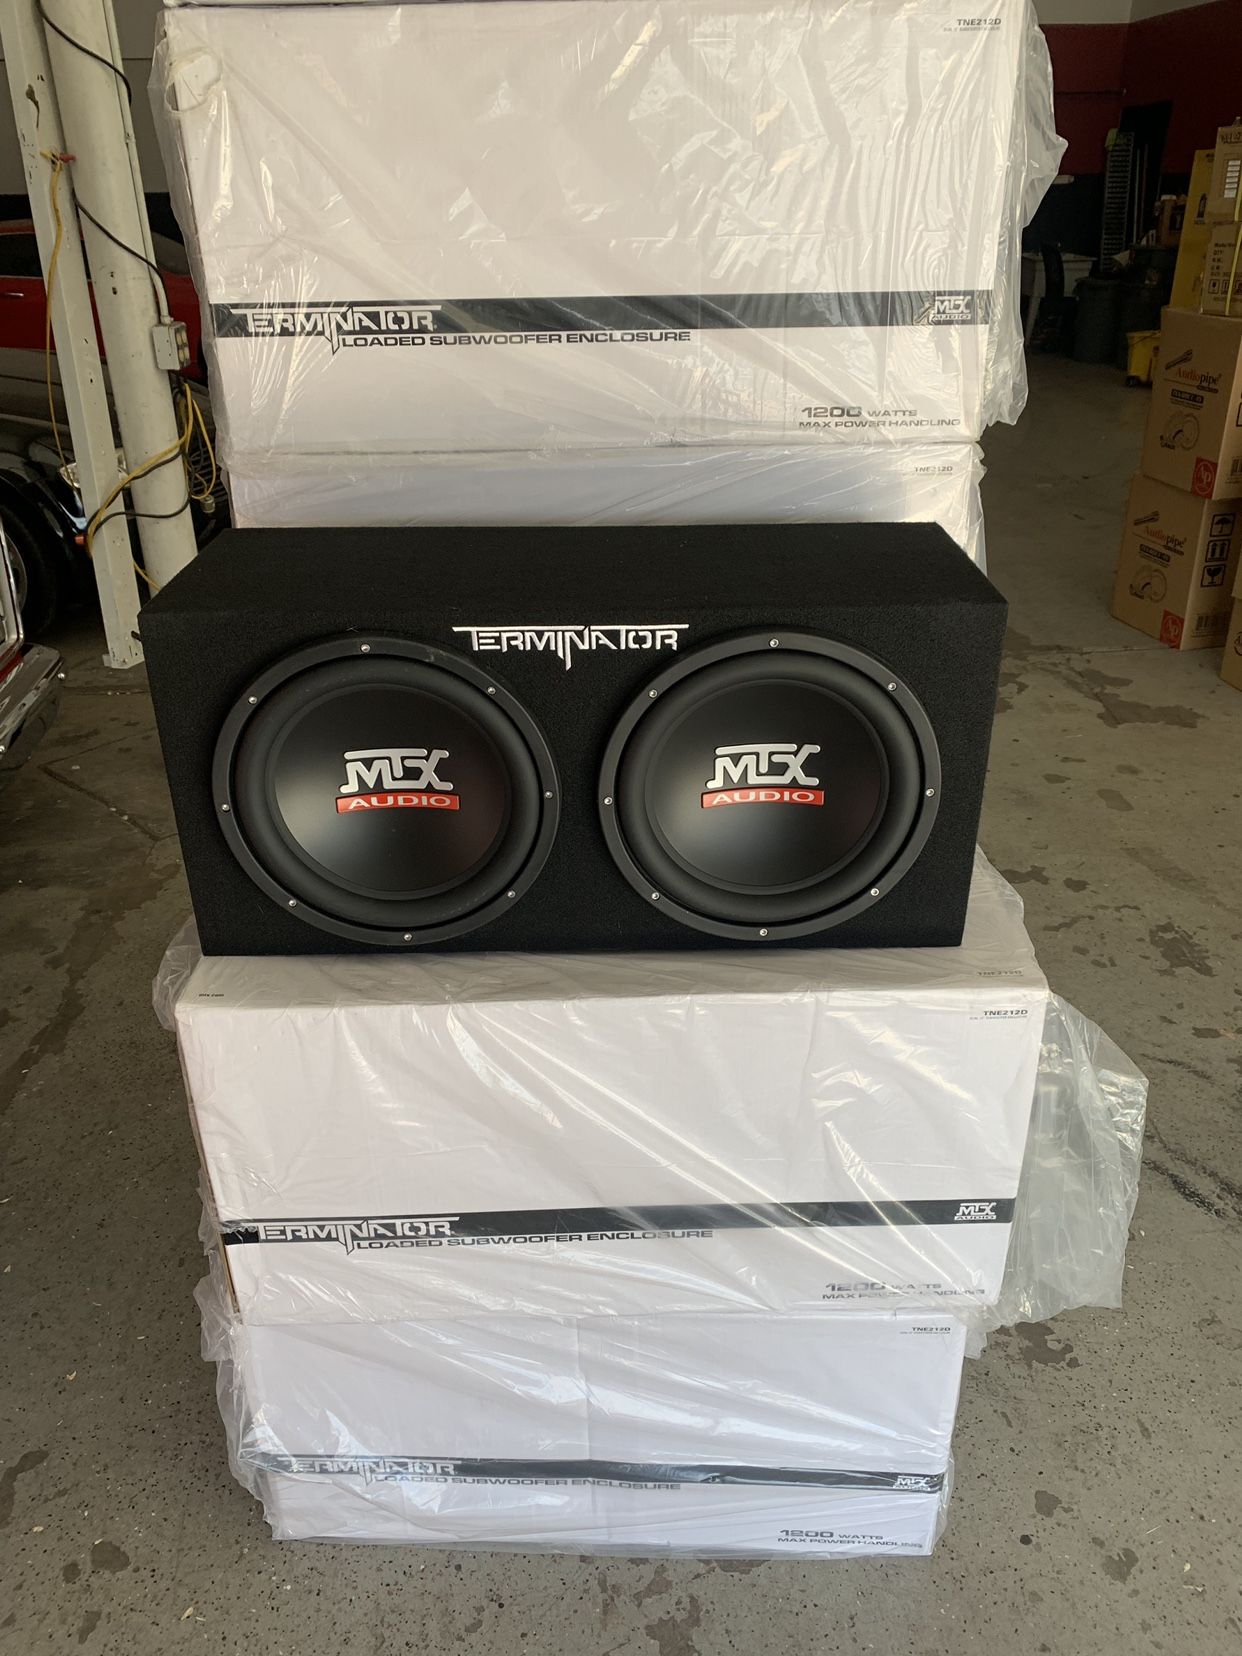 Mtx Car Audio . 12 Inch Car Stereo Subwoofers And Box . Extended Holiday Super Sale . $119 While They Last . New